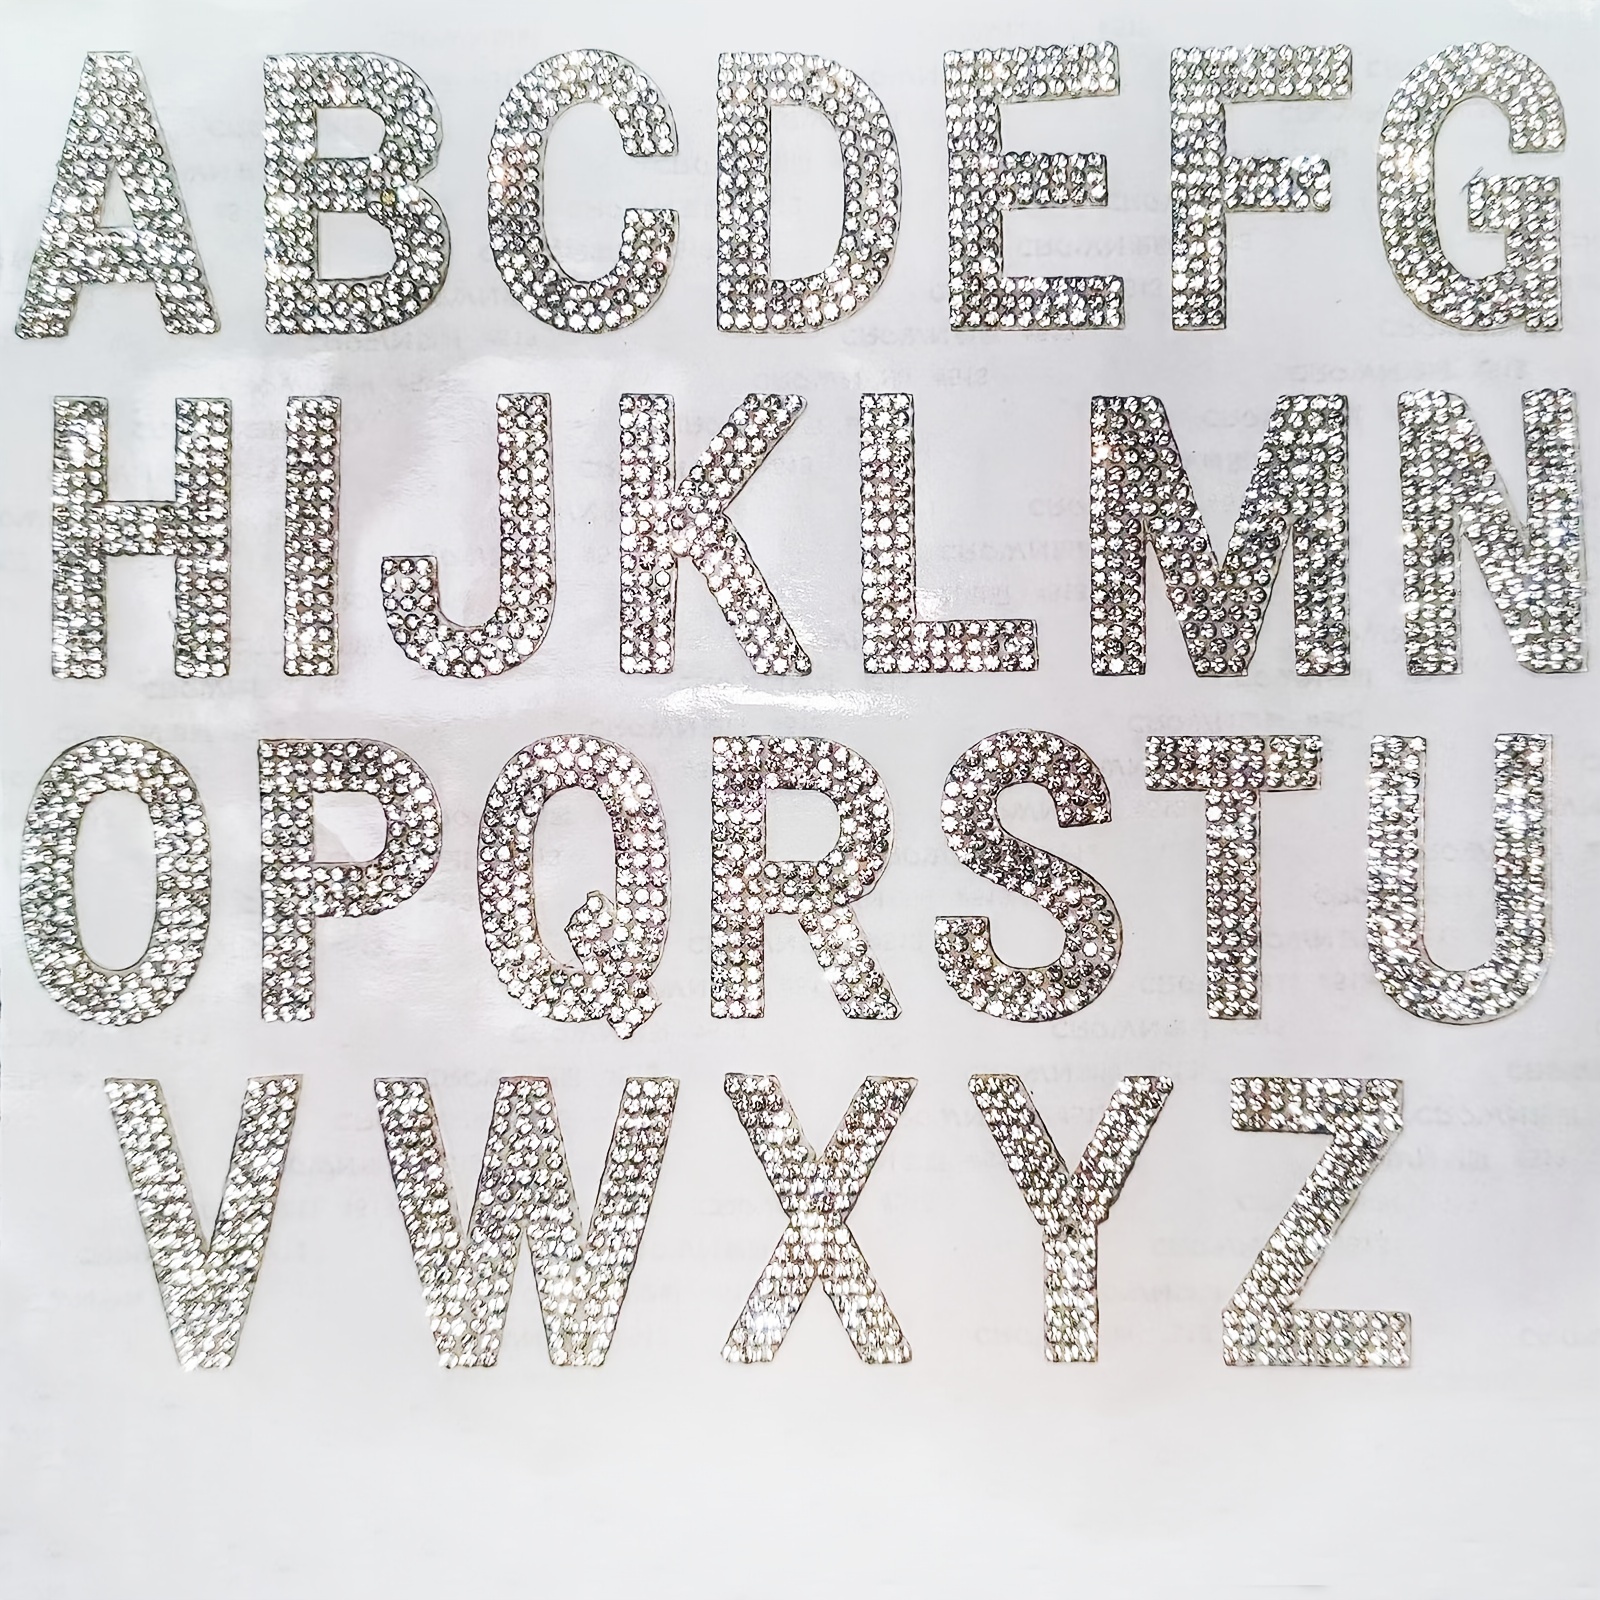 68 Pieces Glitter Rhinestone Stickers Glitter Rhinestone Alphabet Letter  Stickers 34 Letters Self-Adhesive Stickers for Art Crafts Clothing DIY